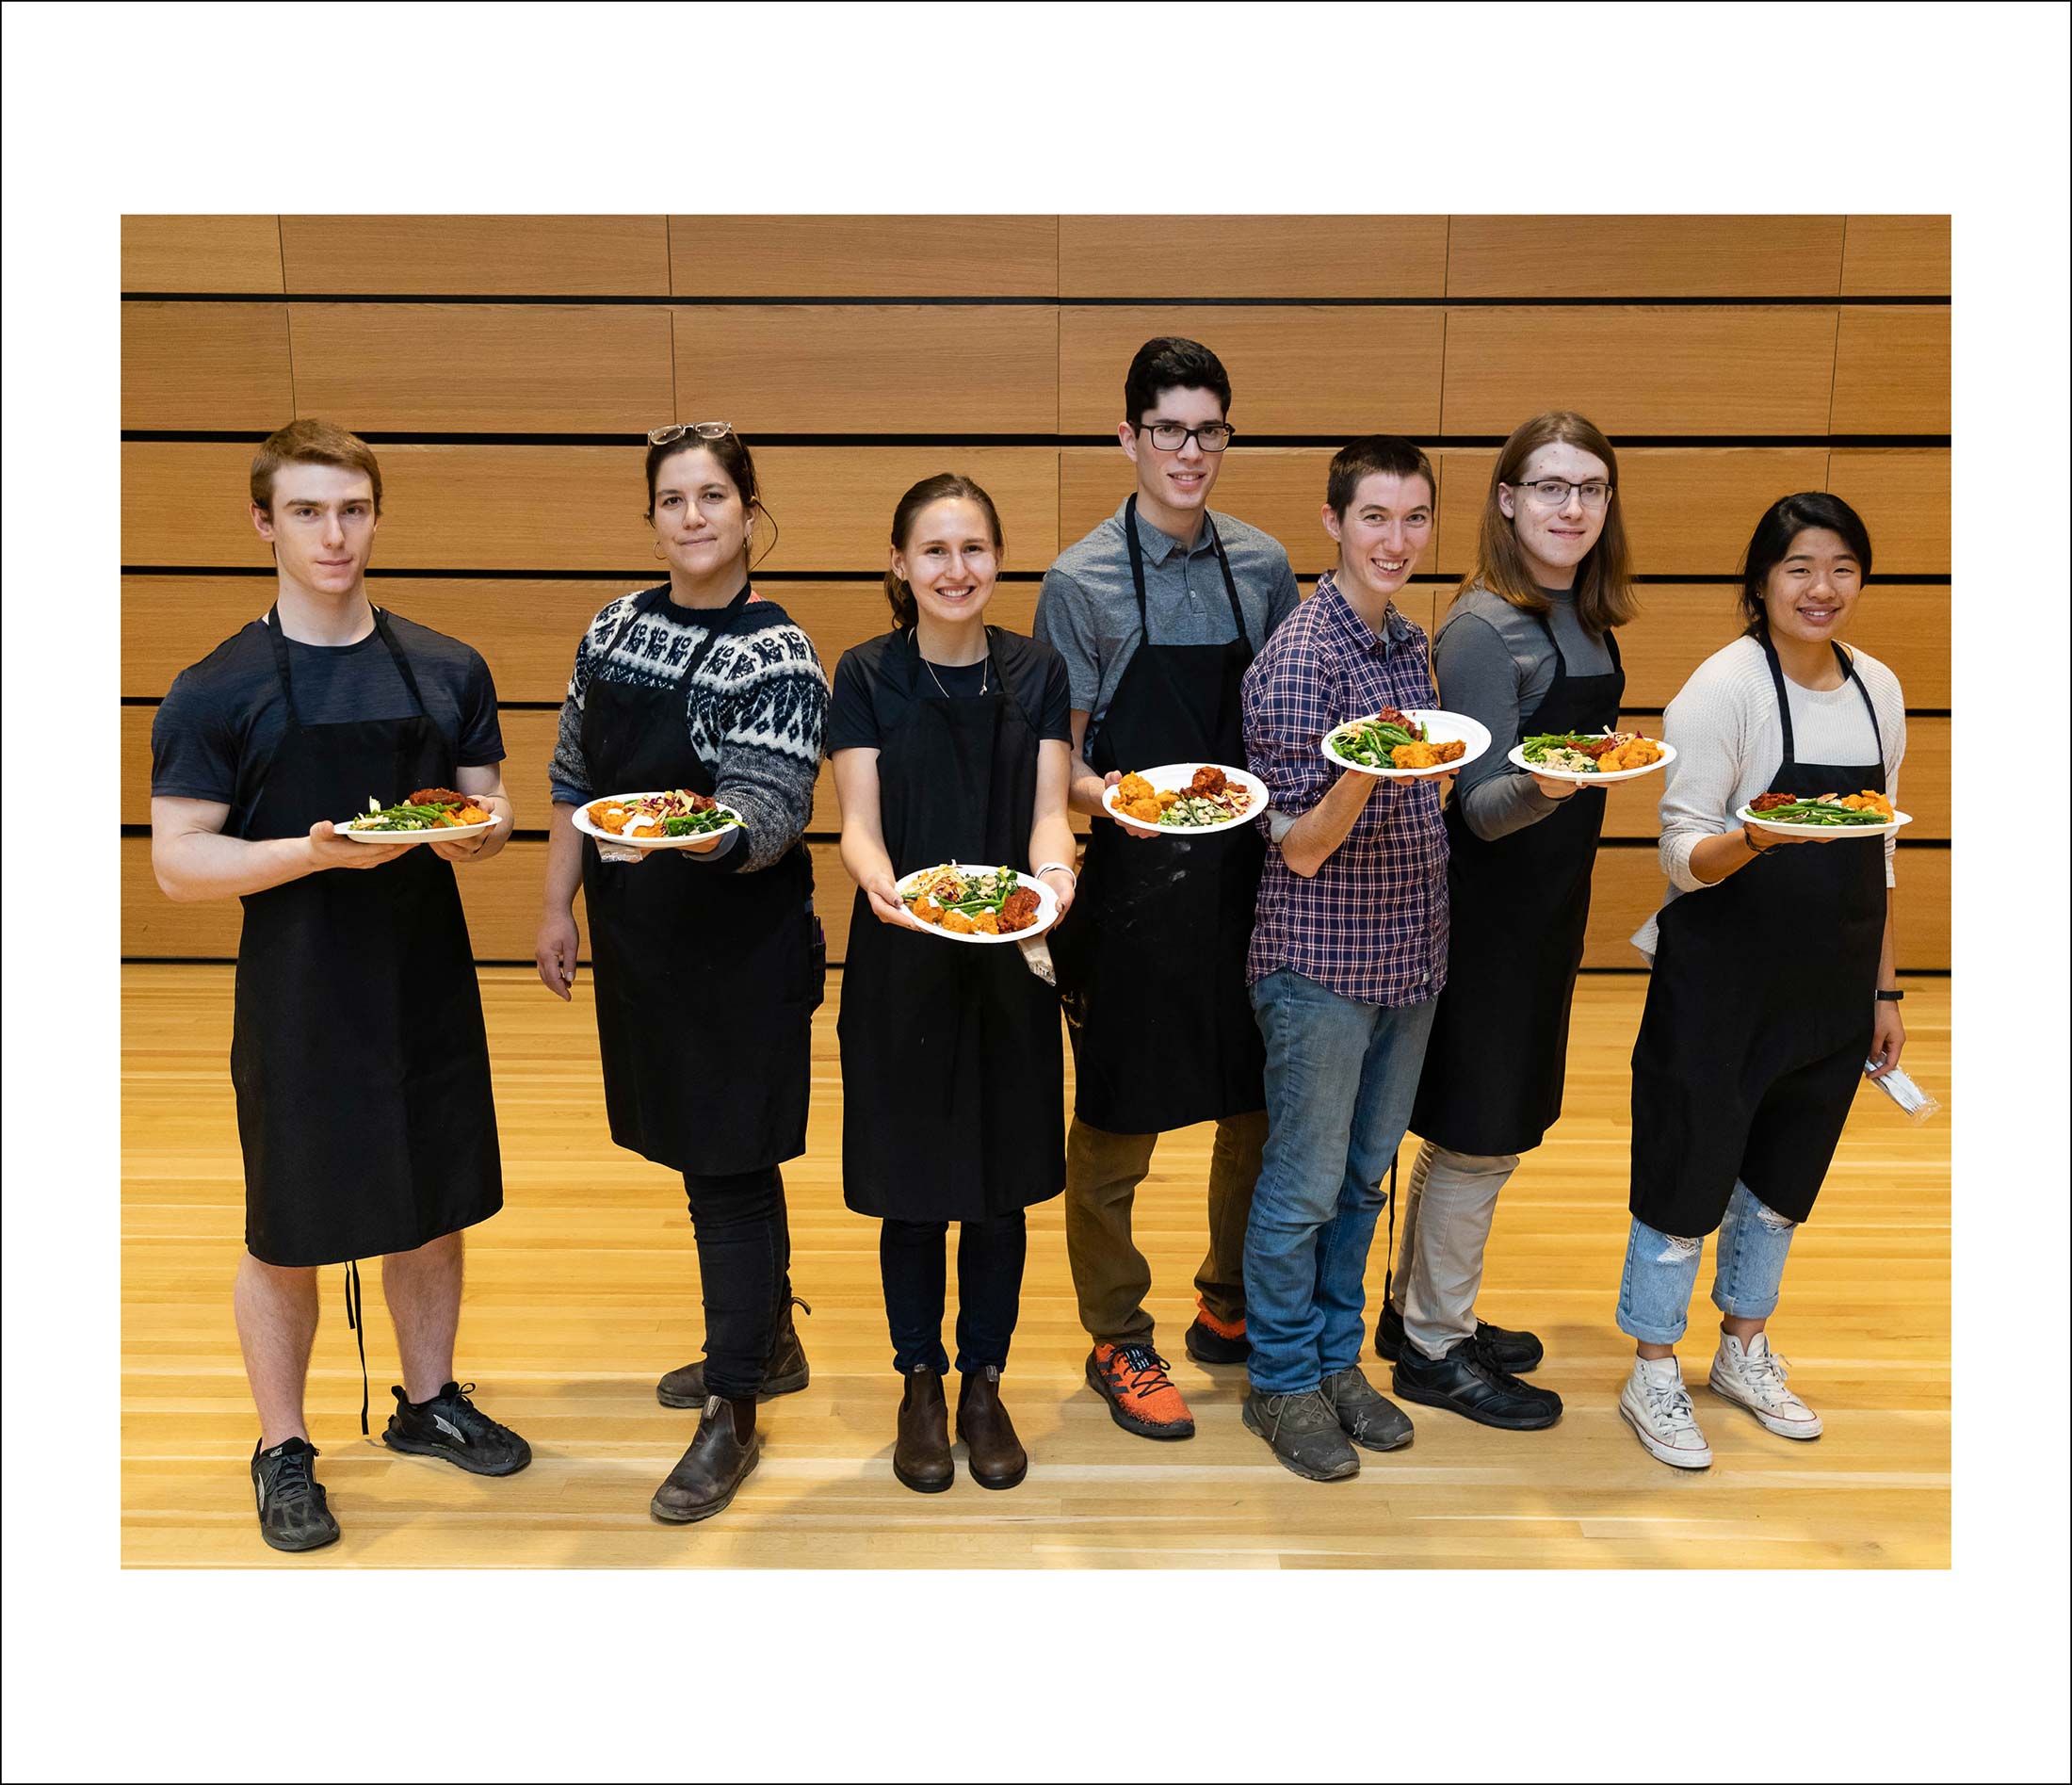 Seven people wearing black aprons, each holding a plateful of food